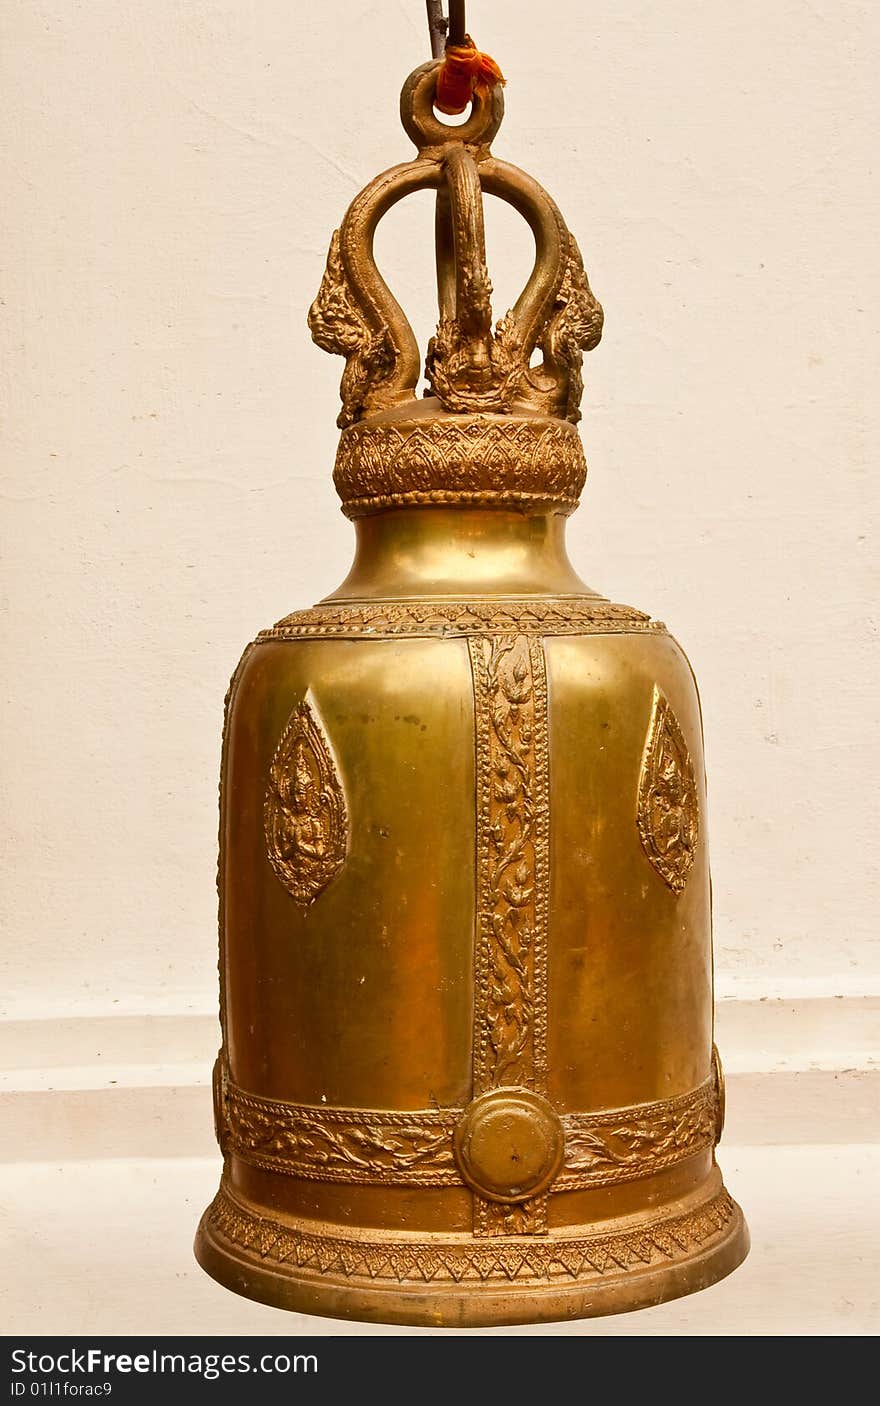 Brass bell in traditional Thai style. Brass bell in traditional Thai style.